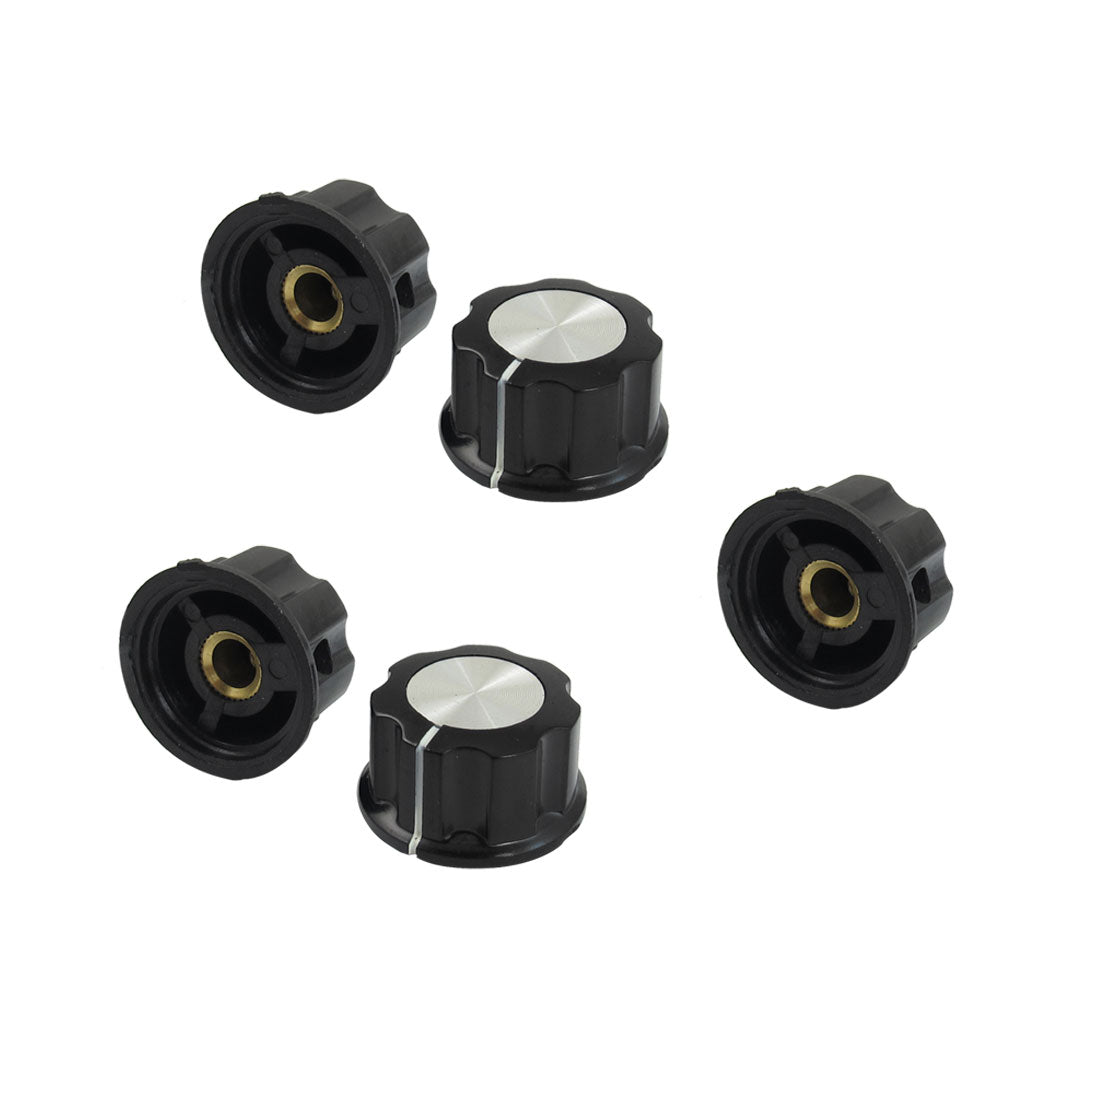 uxcell Uxcell 5 Pcs Black Silver Tone 24mm Top Rotary Knobs for 6mm Dia. Shaft Potentiometer